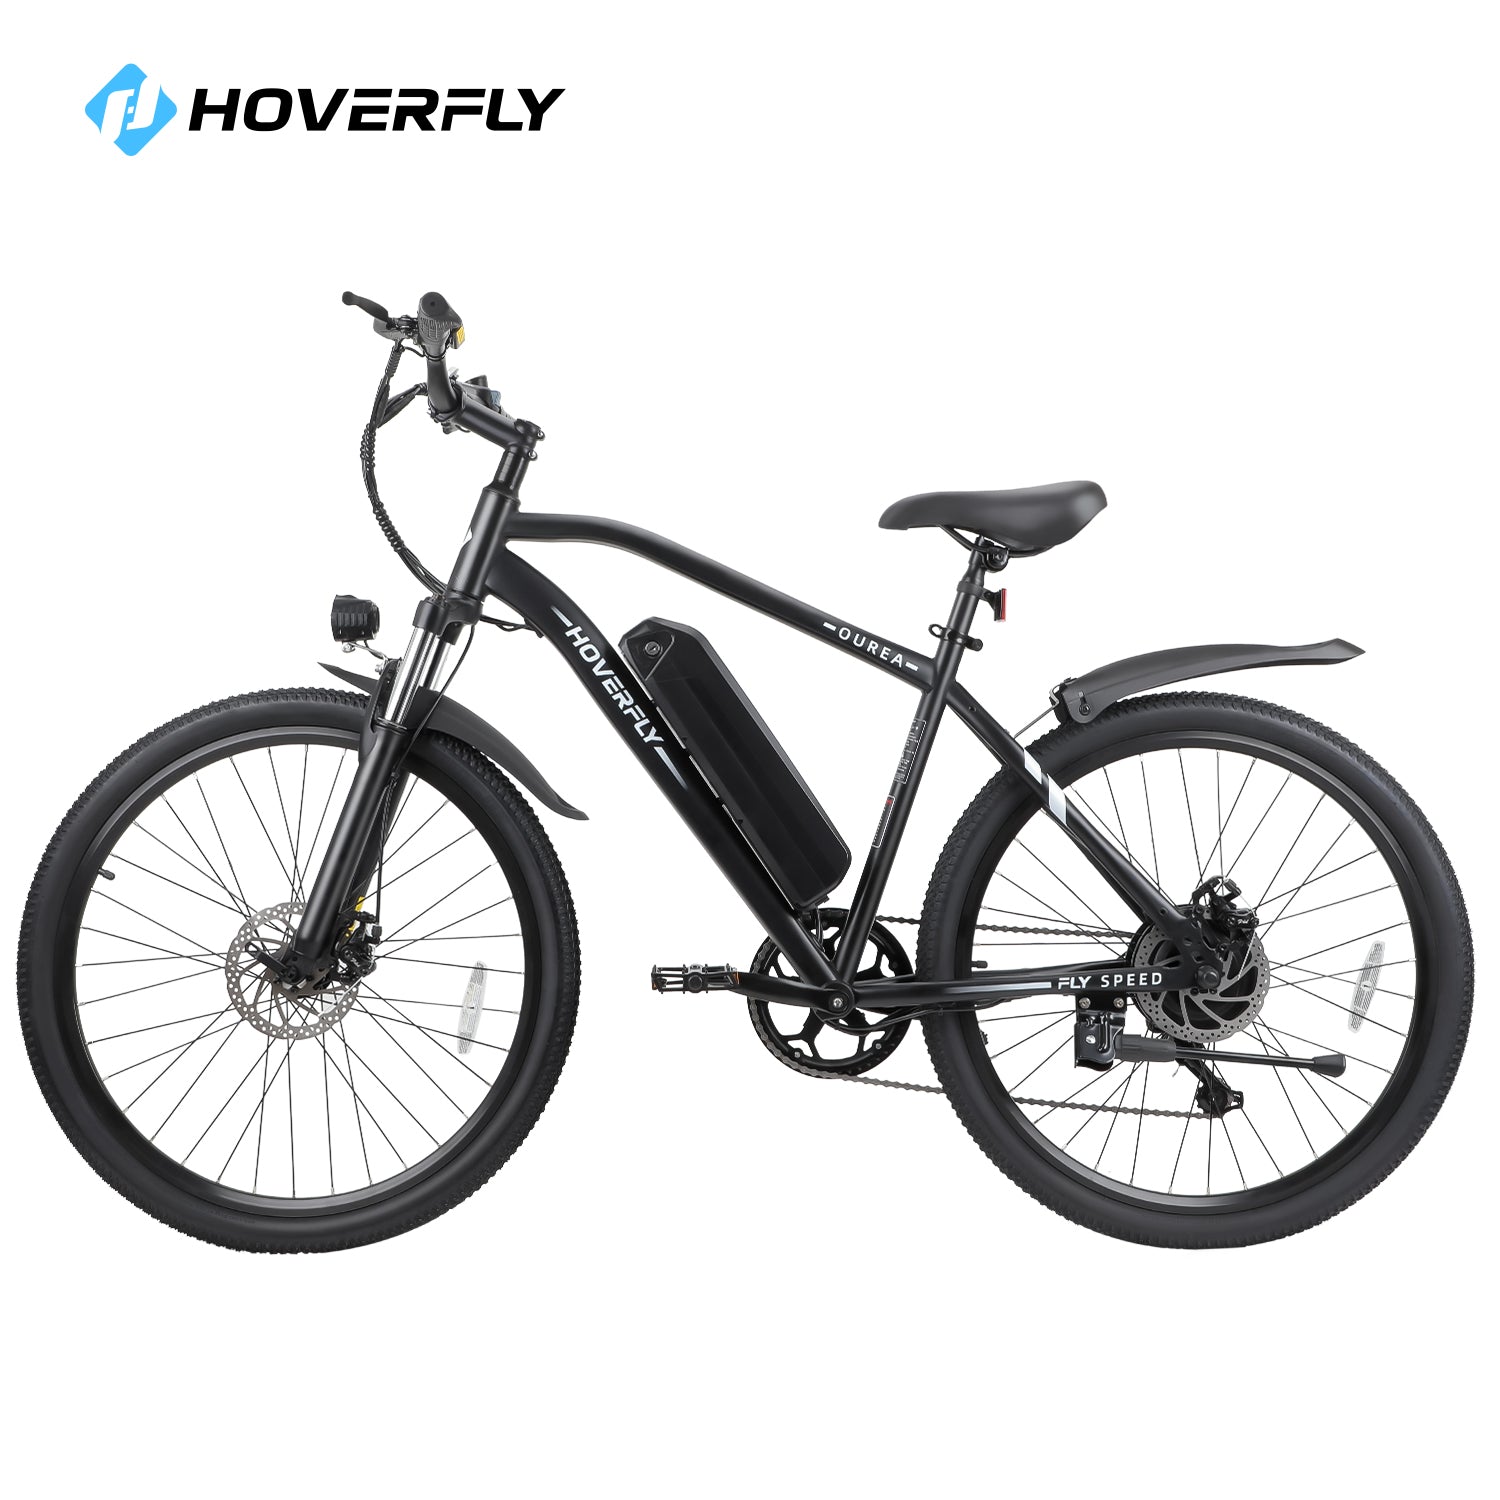 Hoverfly Ourea Commuter Electric Bike in Sophisticated Black, Displaying Its Sturdy 26" Tires and Adjustable Front Suspension Fork. Designed for Smooth Riding Across Any Terrain, This Bike is Equipped with a Detachable Battery for Effortless Recharging.